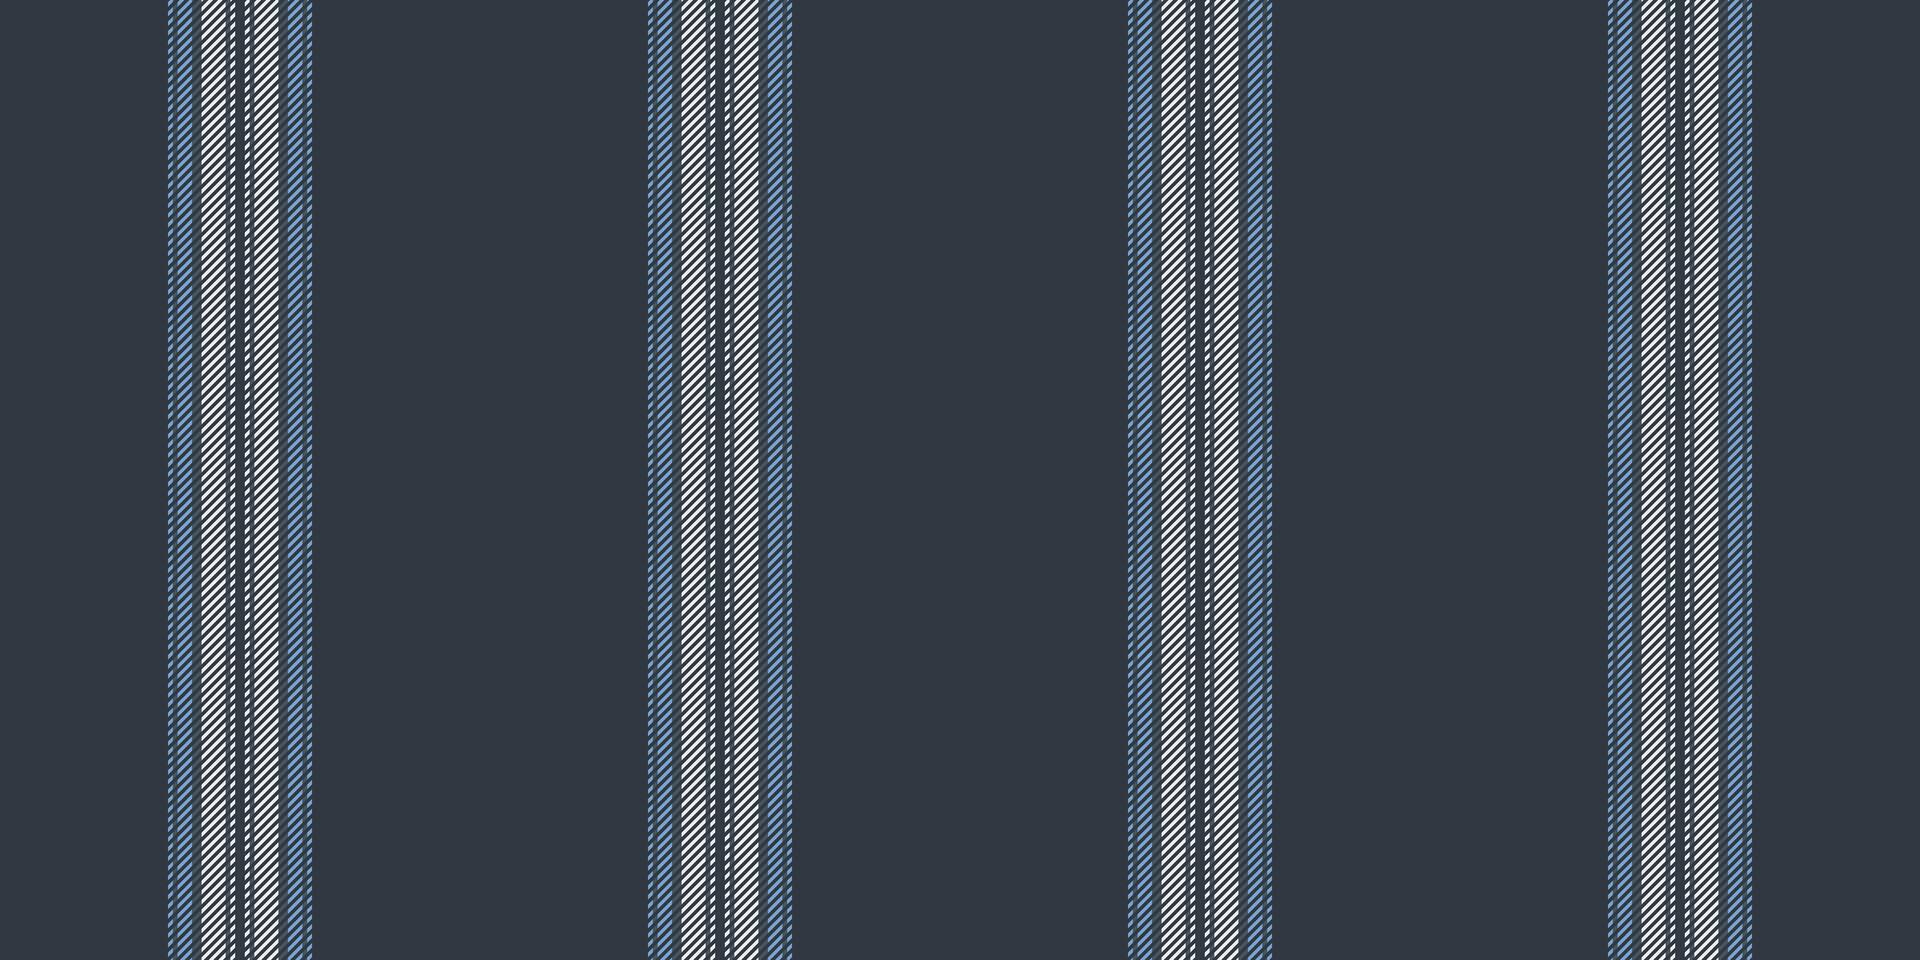 Colourful vector lines texture, trend background stripe seamless. School fabric textile pattern vertical in dark and white colors.